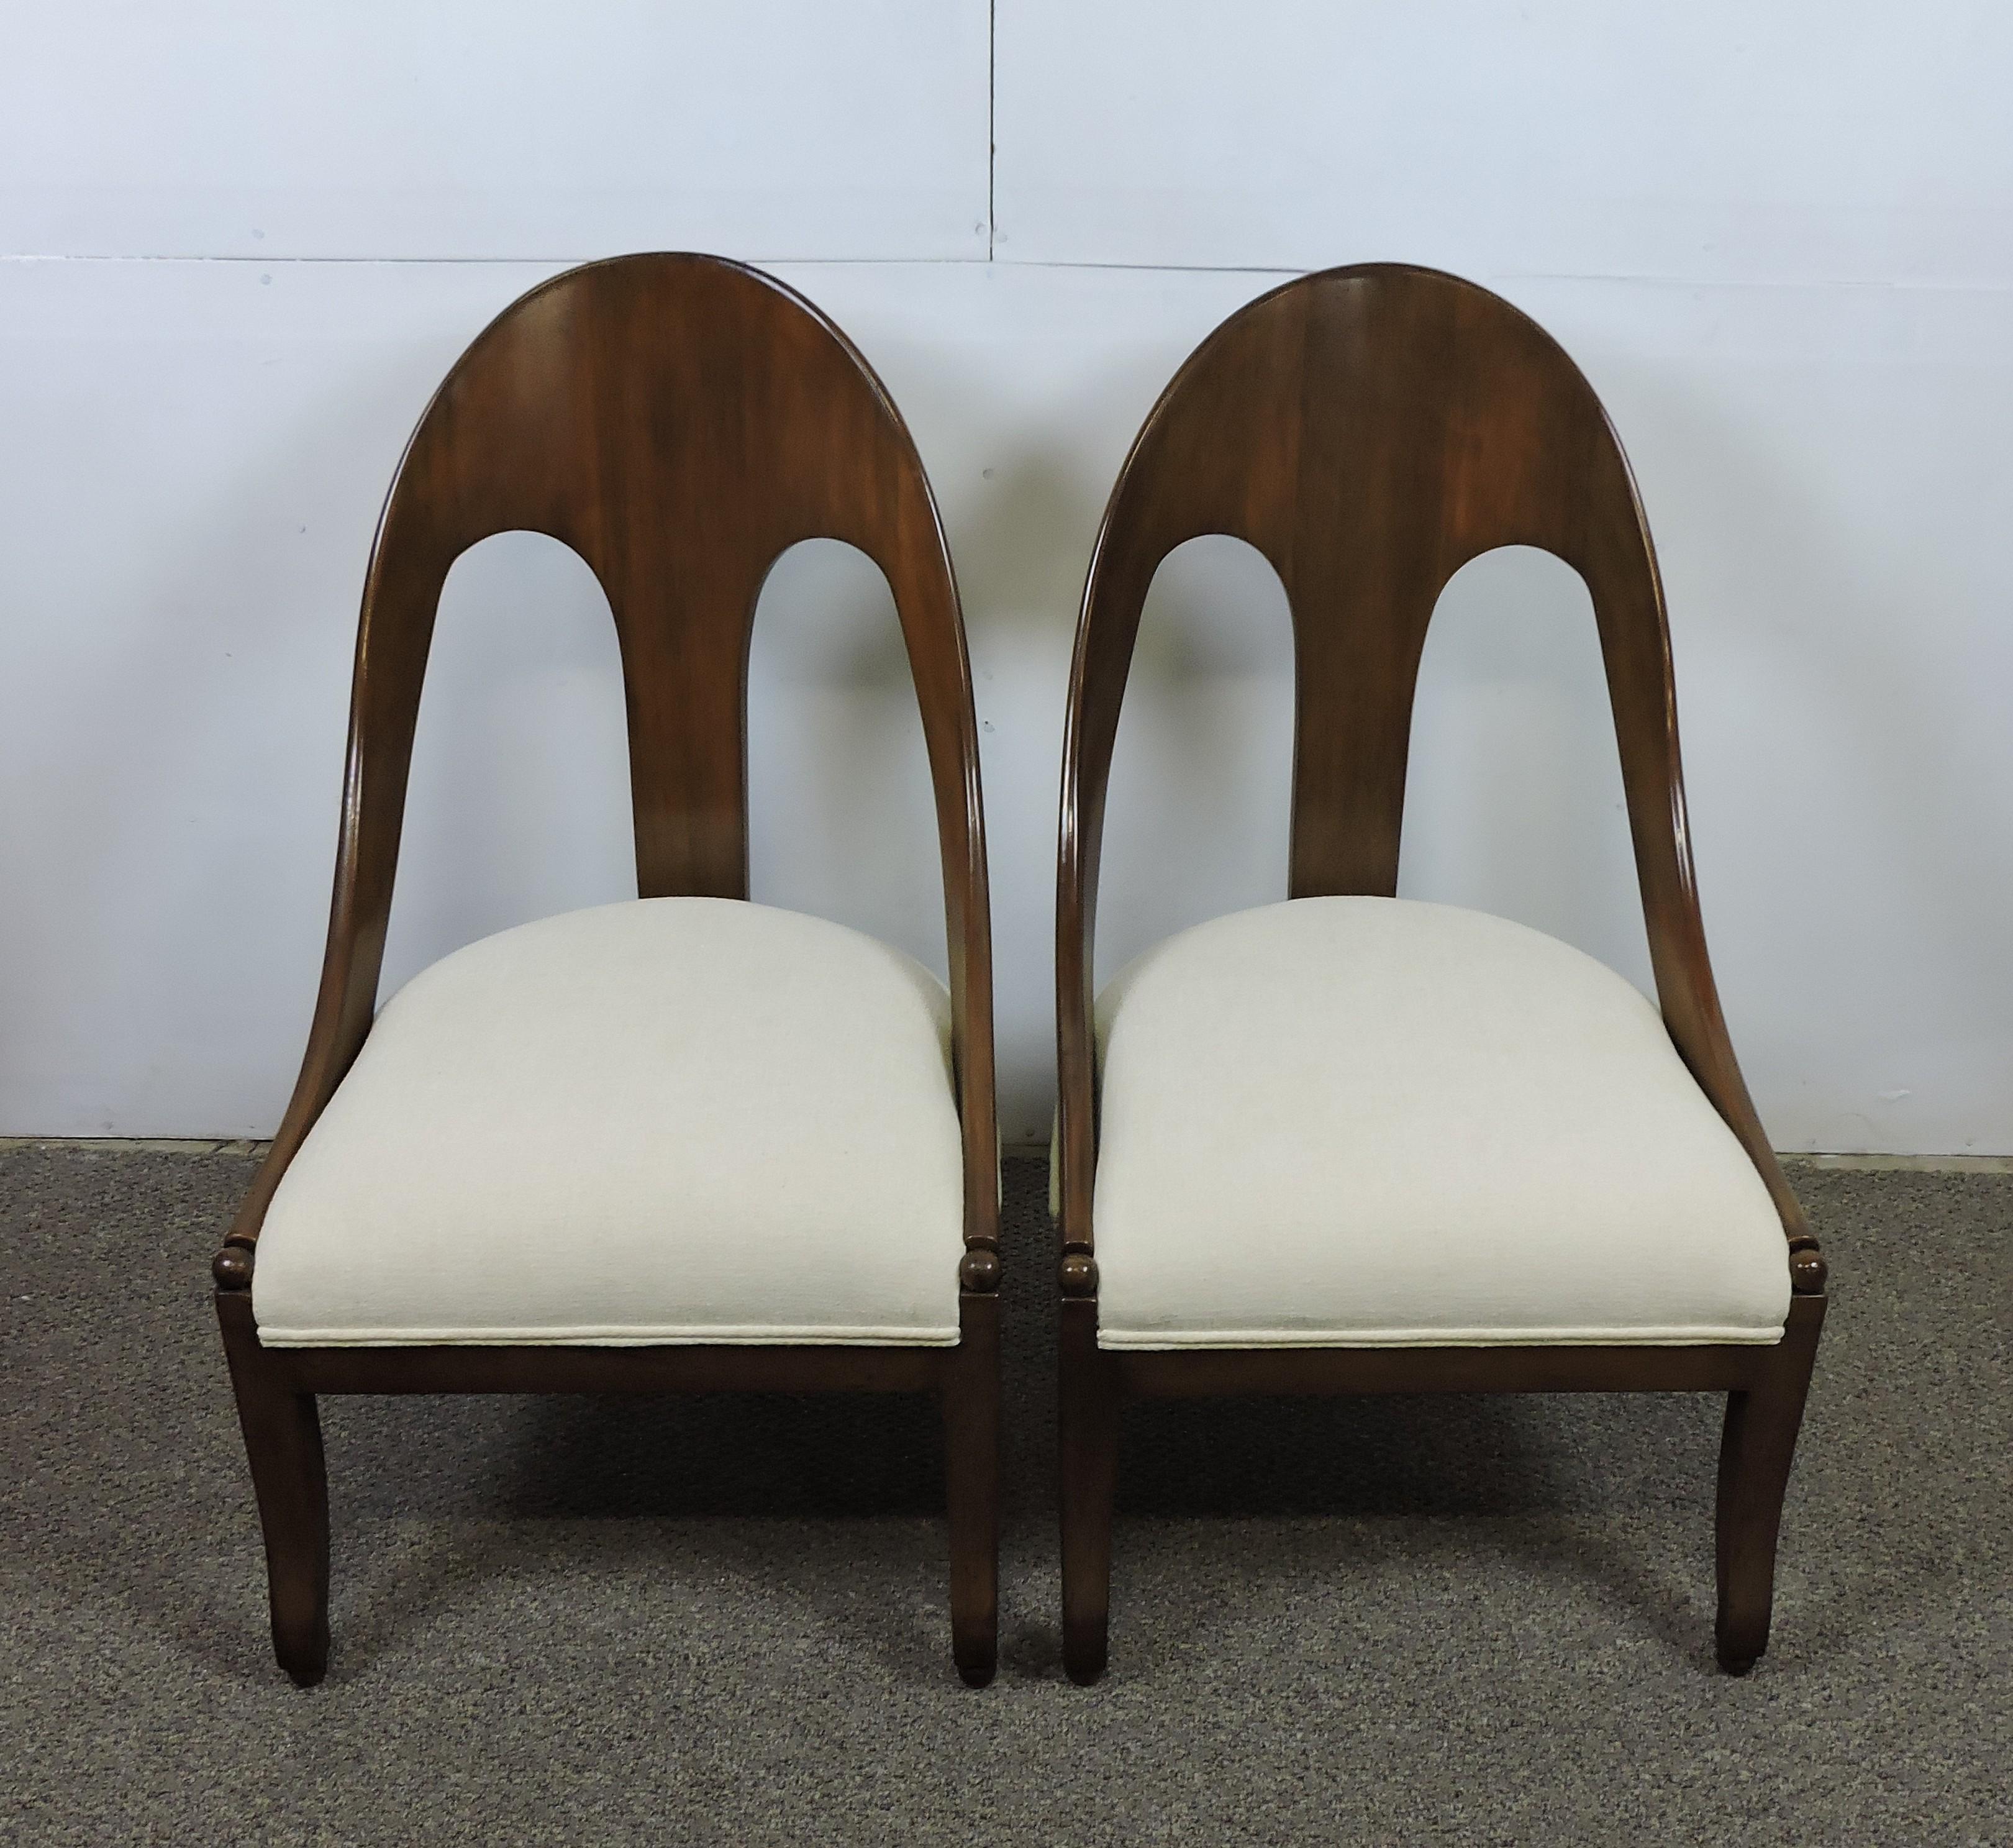 Elegant and graceful pair of neoclassical slipper lounge chairs designed by Michael Taylor and manufactured by Baker Furniture Company. These chairs are made of solid mahogany and are newly re-upholstered in an off-white chenille fabric.